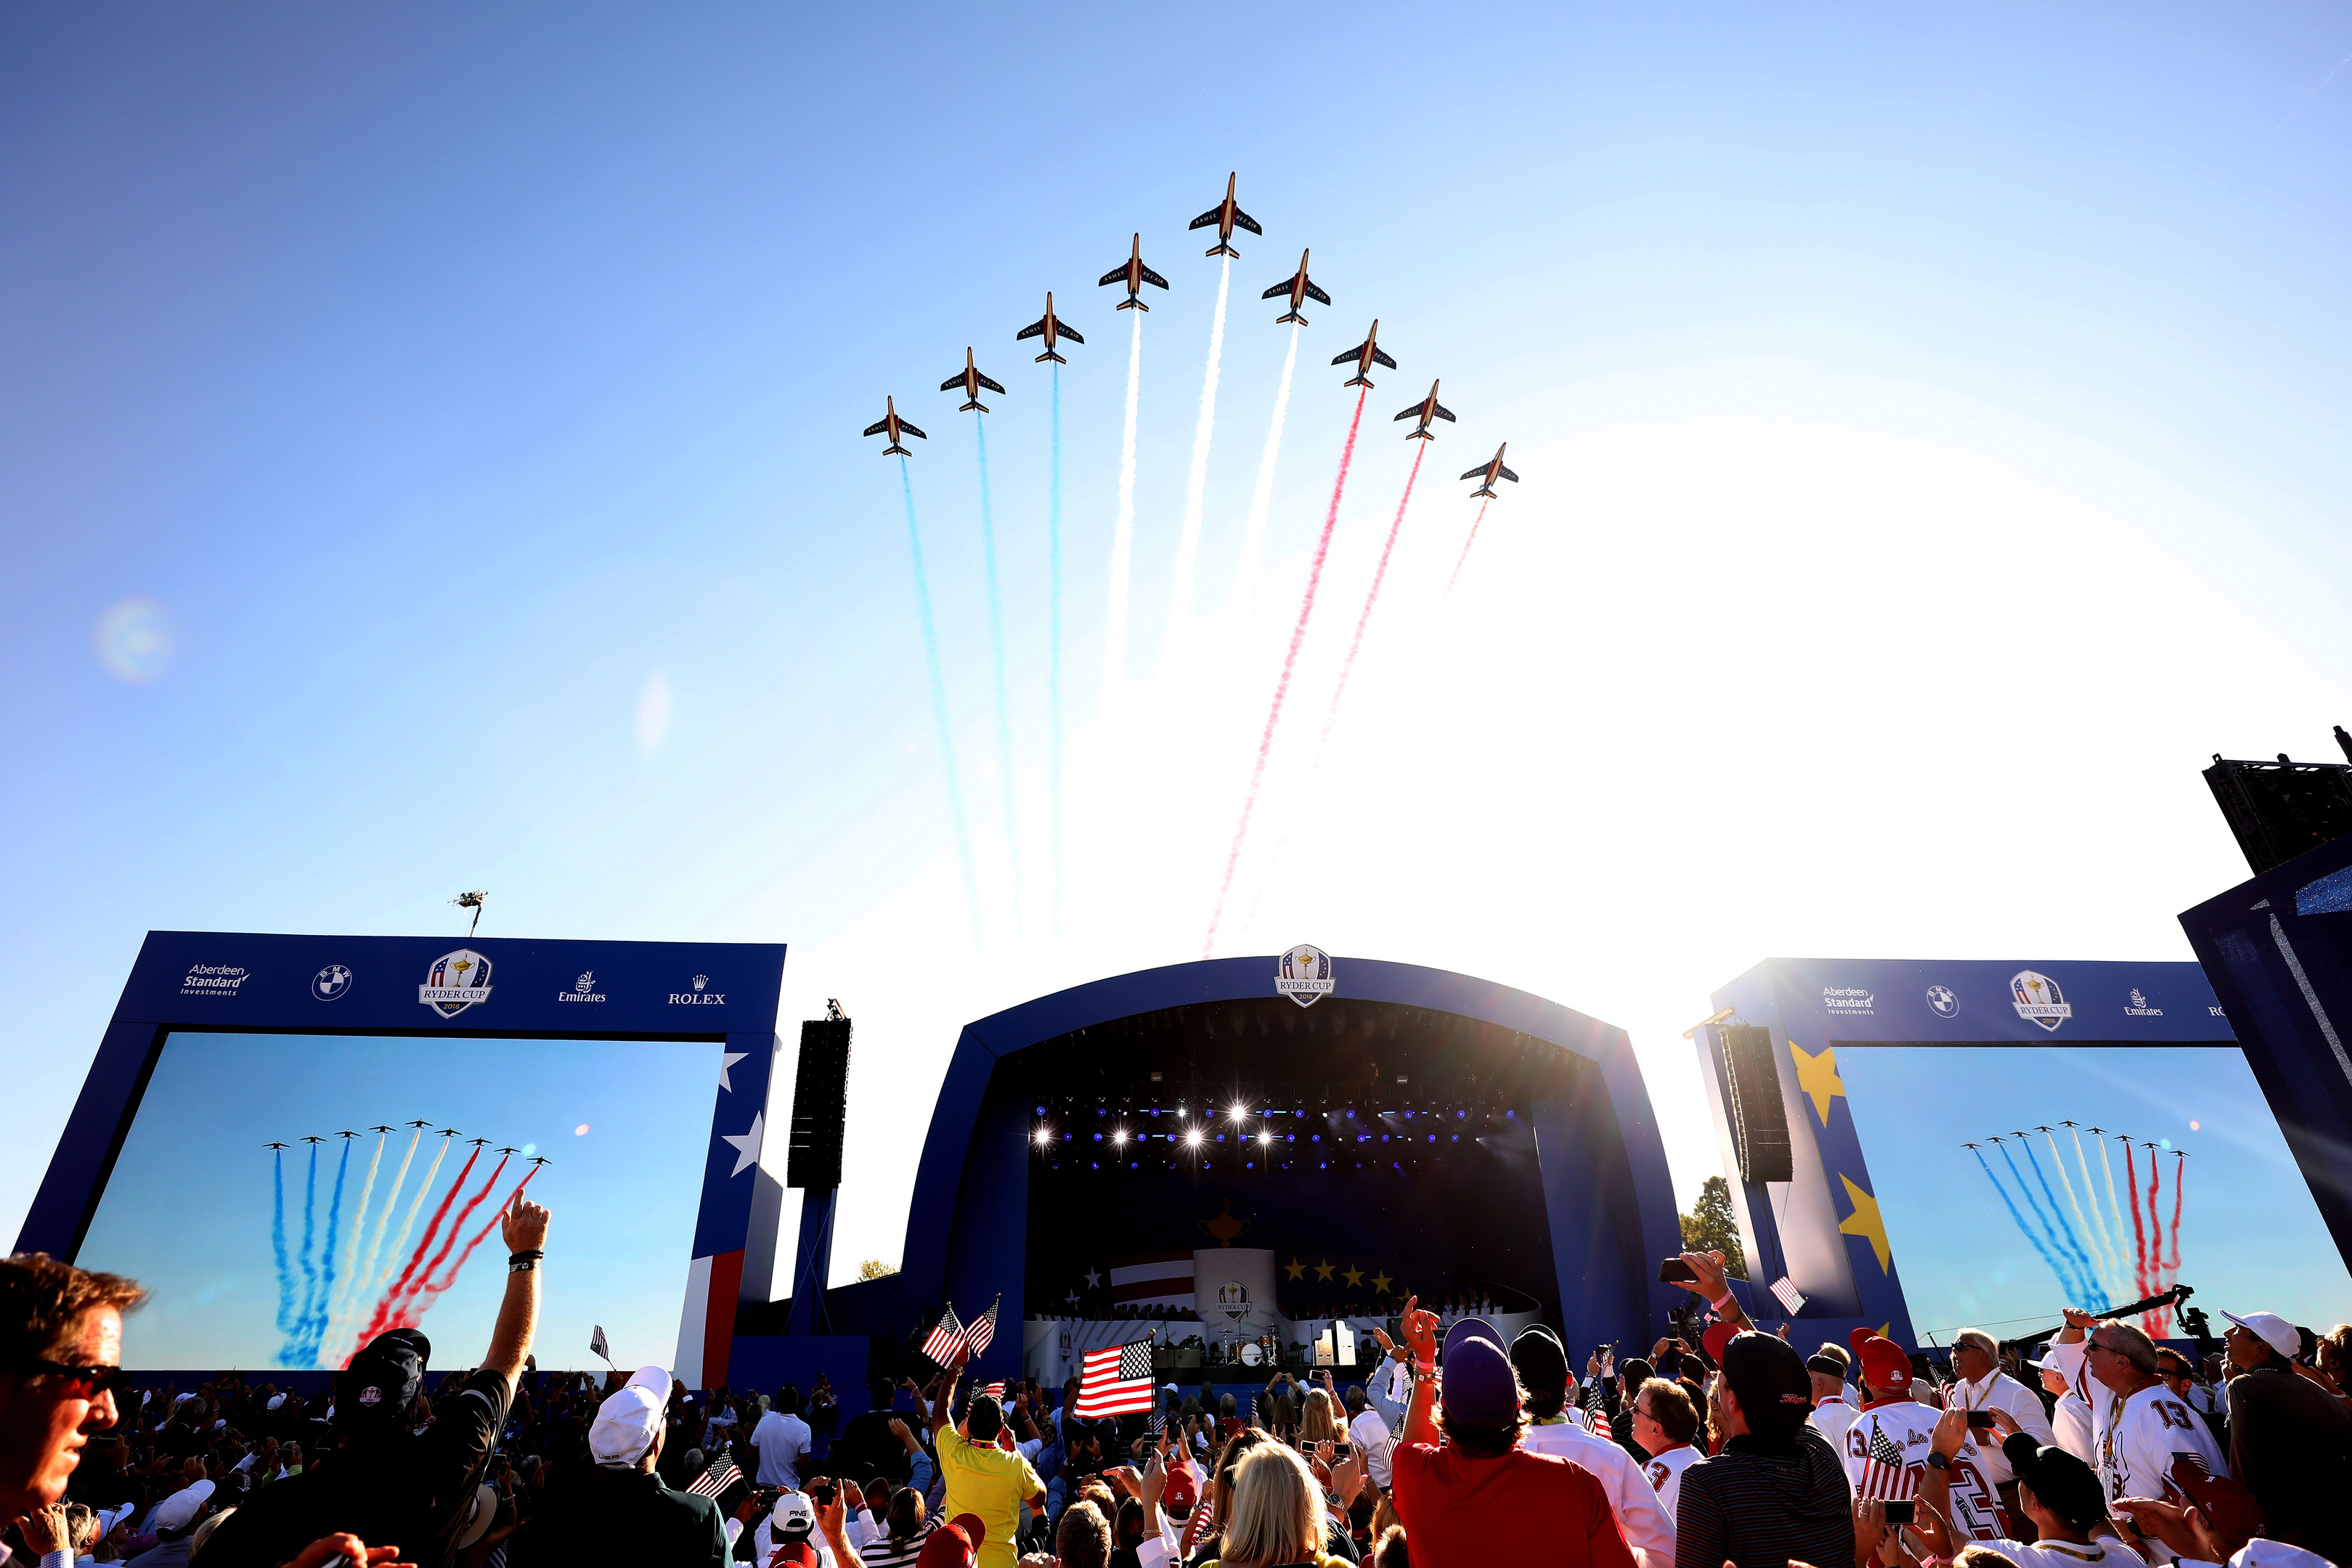 The Patrouille de France fly over during the opening ceremony for the 2018 Ryder Cup at Le Golf National.